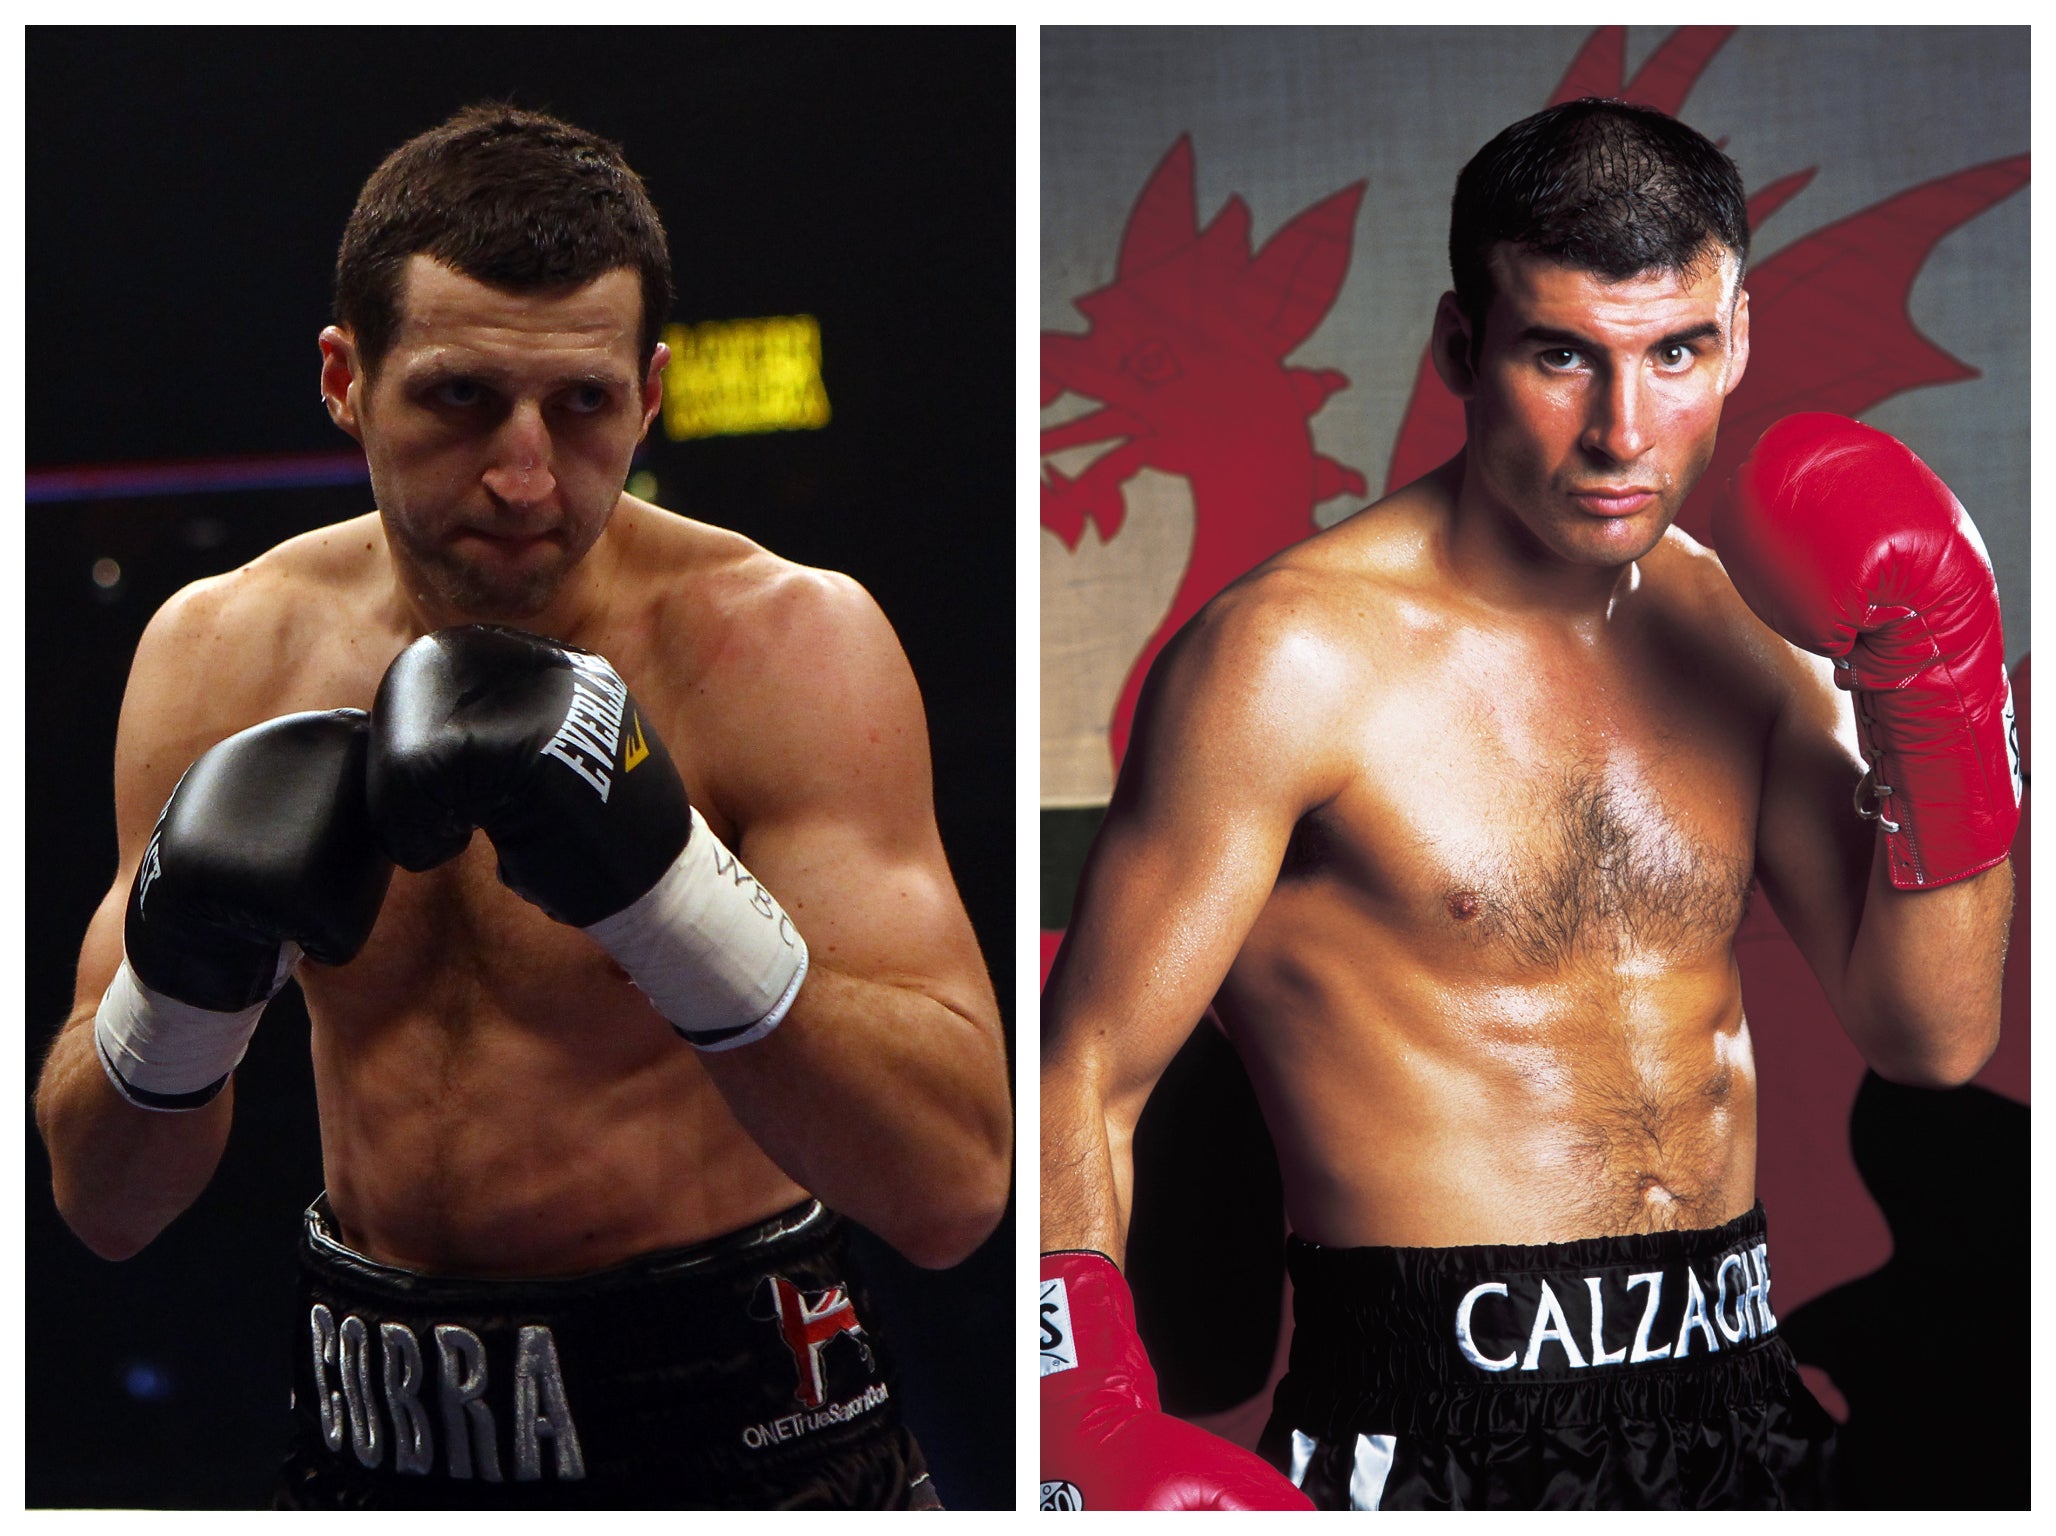 Carl Froch wants to come out of retirement to fight Joe Calzaghe, insults size of Welshmans head The Independent The Independent